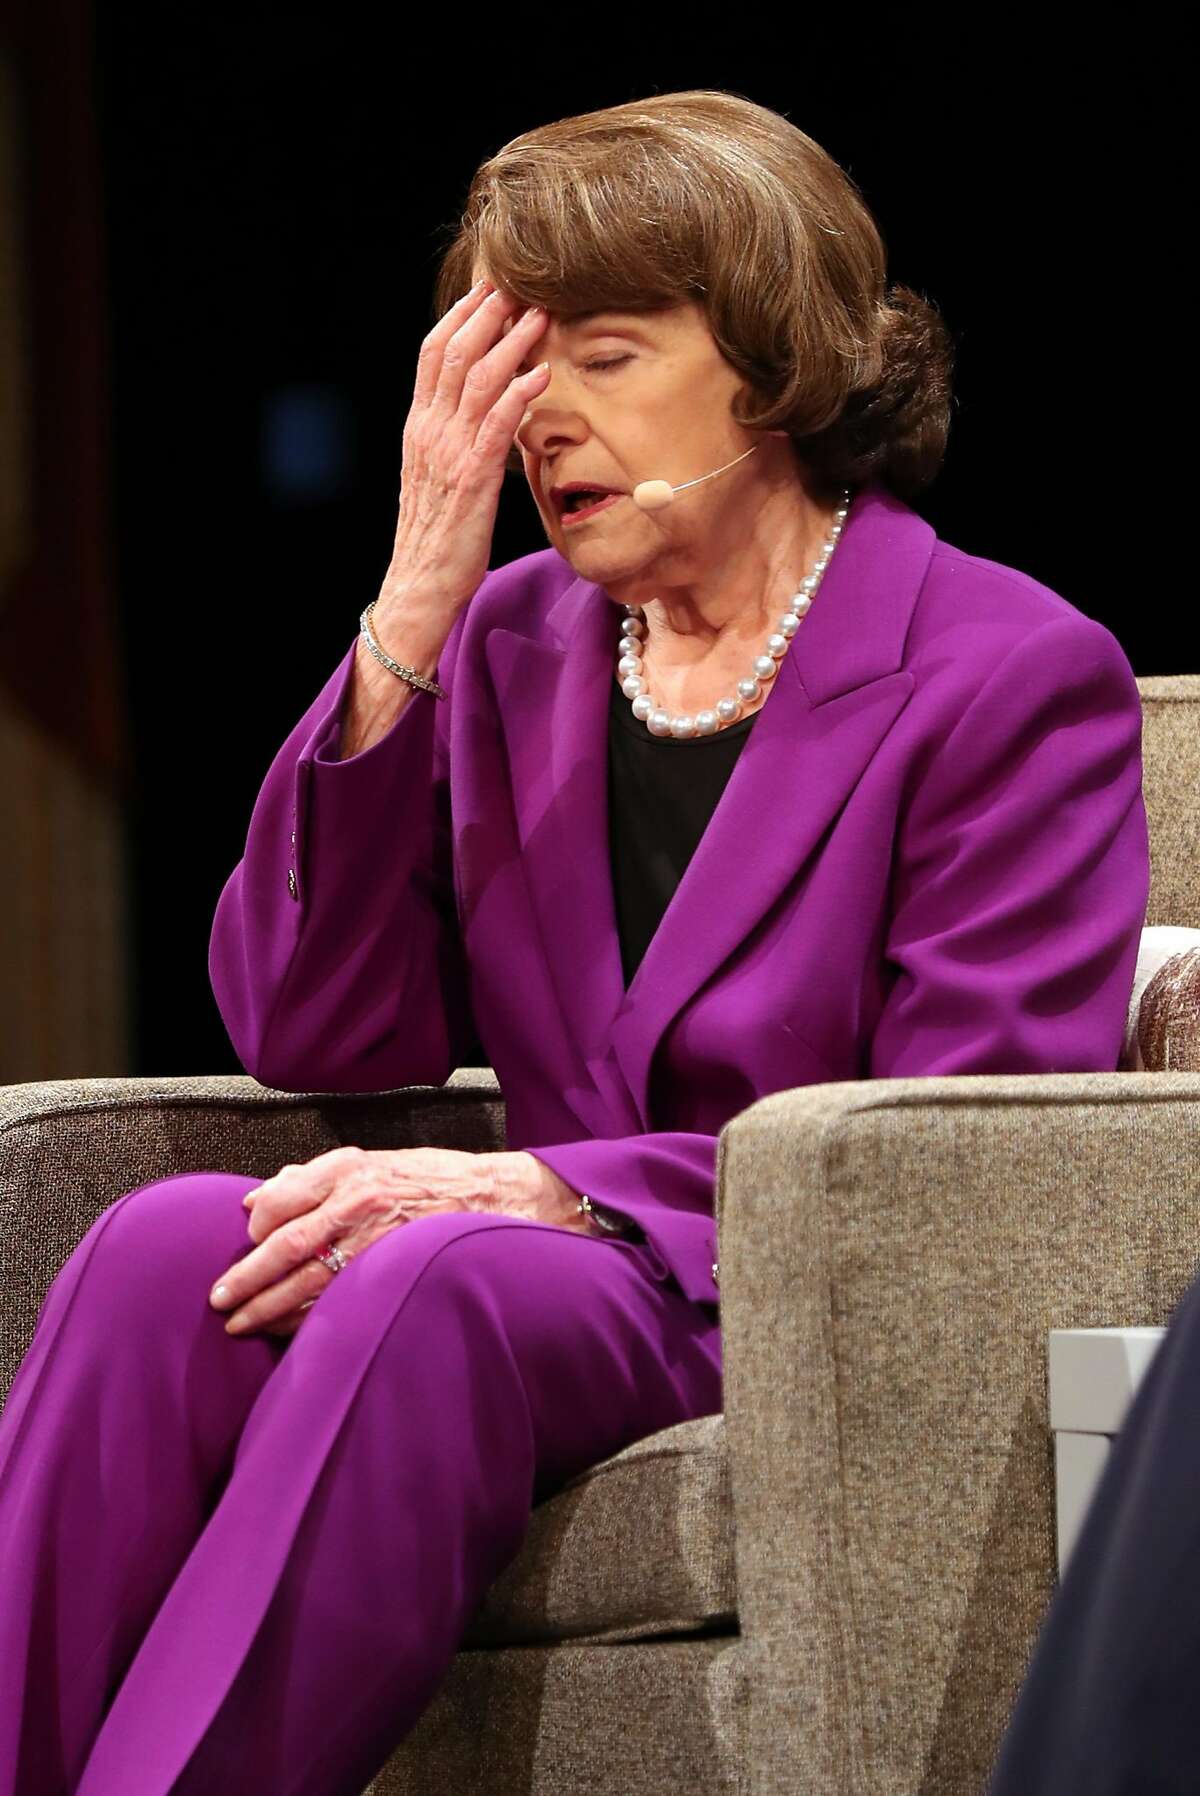 Sen. Dianne Feinstein reacts while talking about the Hurricane Harvey flooding in Houston during a conversation with Ellen Tauscher during The Commonwealth Club of California event at Herbst Theater in San Francisco, Calif. on Tuesday, August 29, 2017.